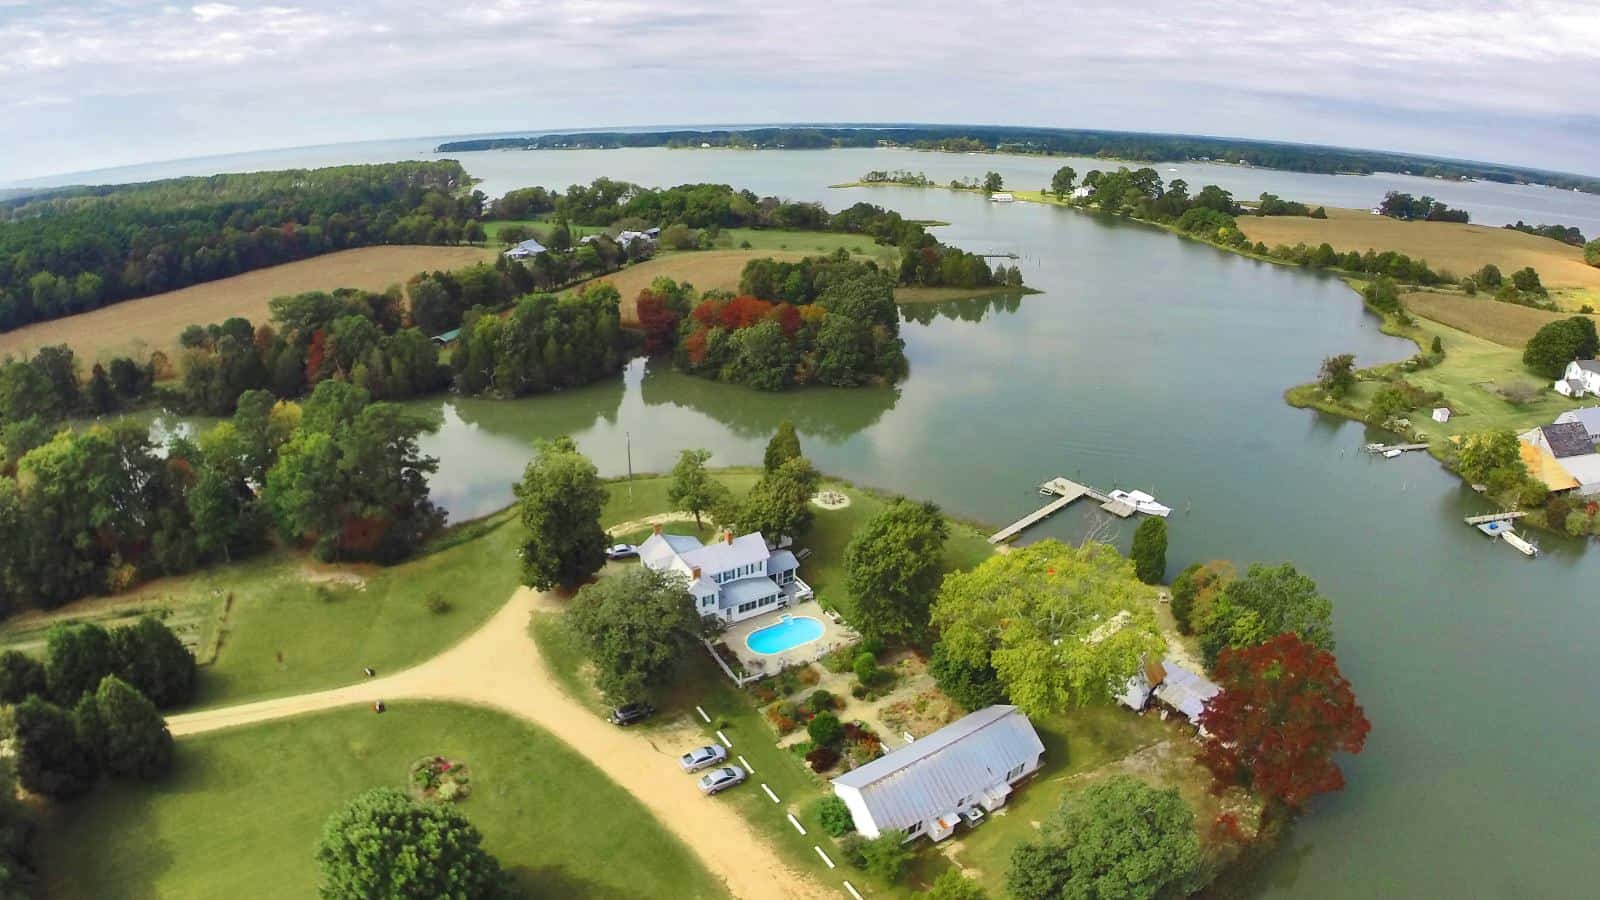 Aerial view of the property surrounded by green grass, trees, and water